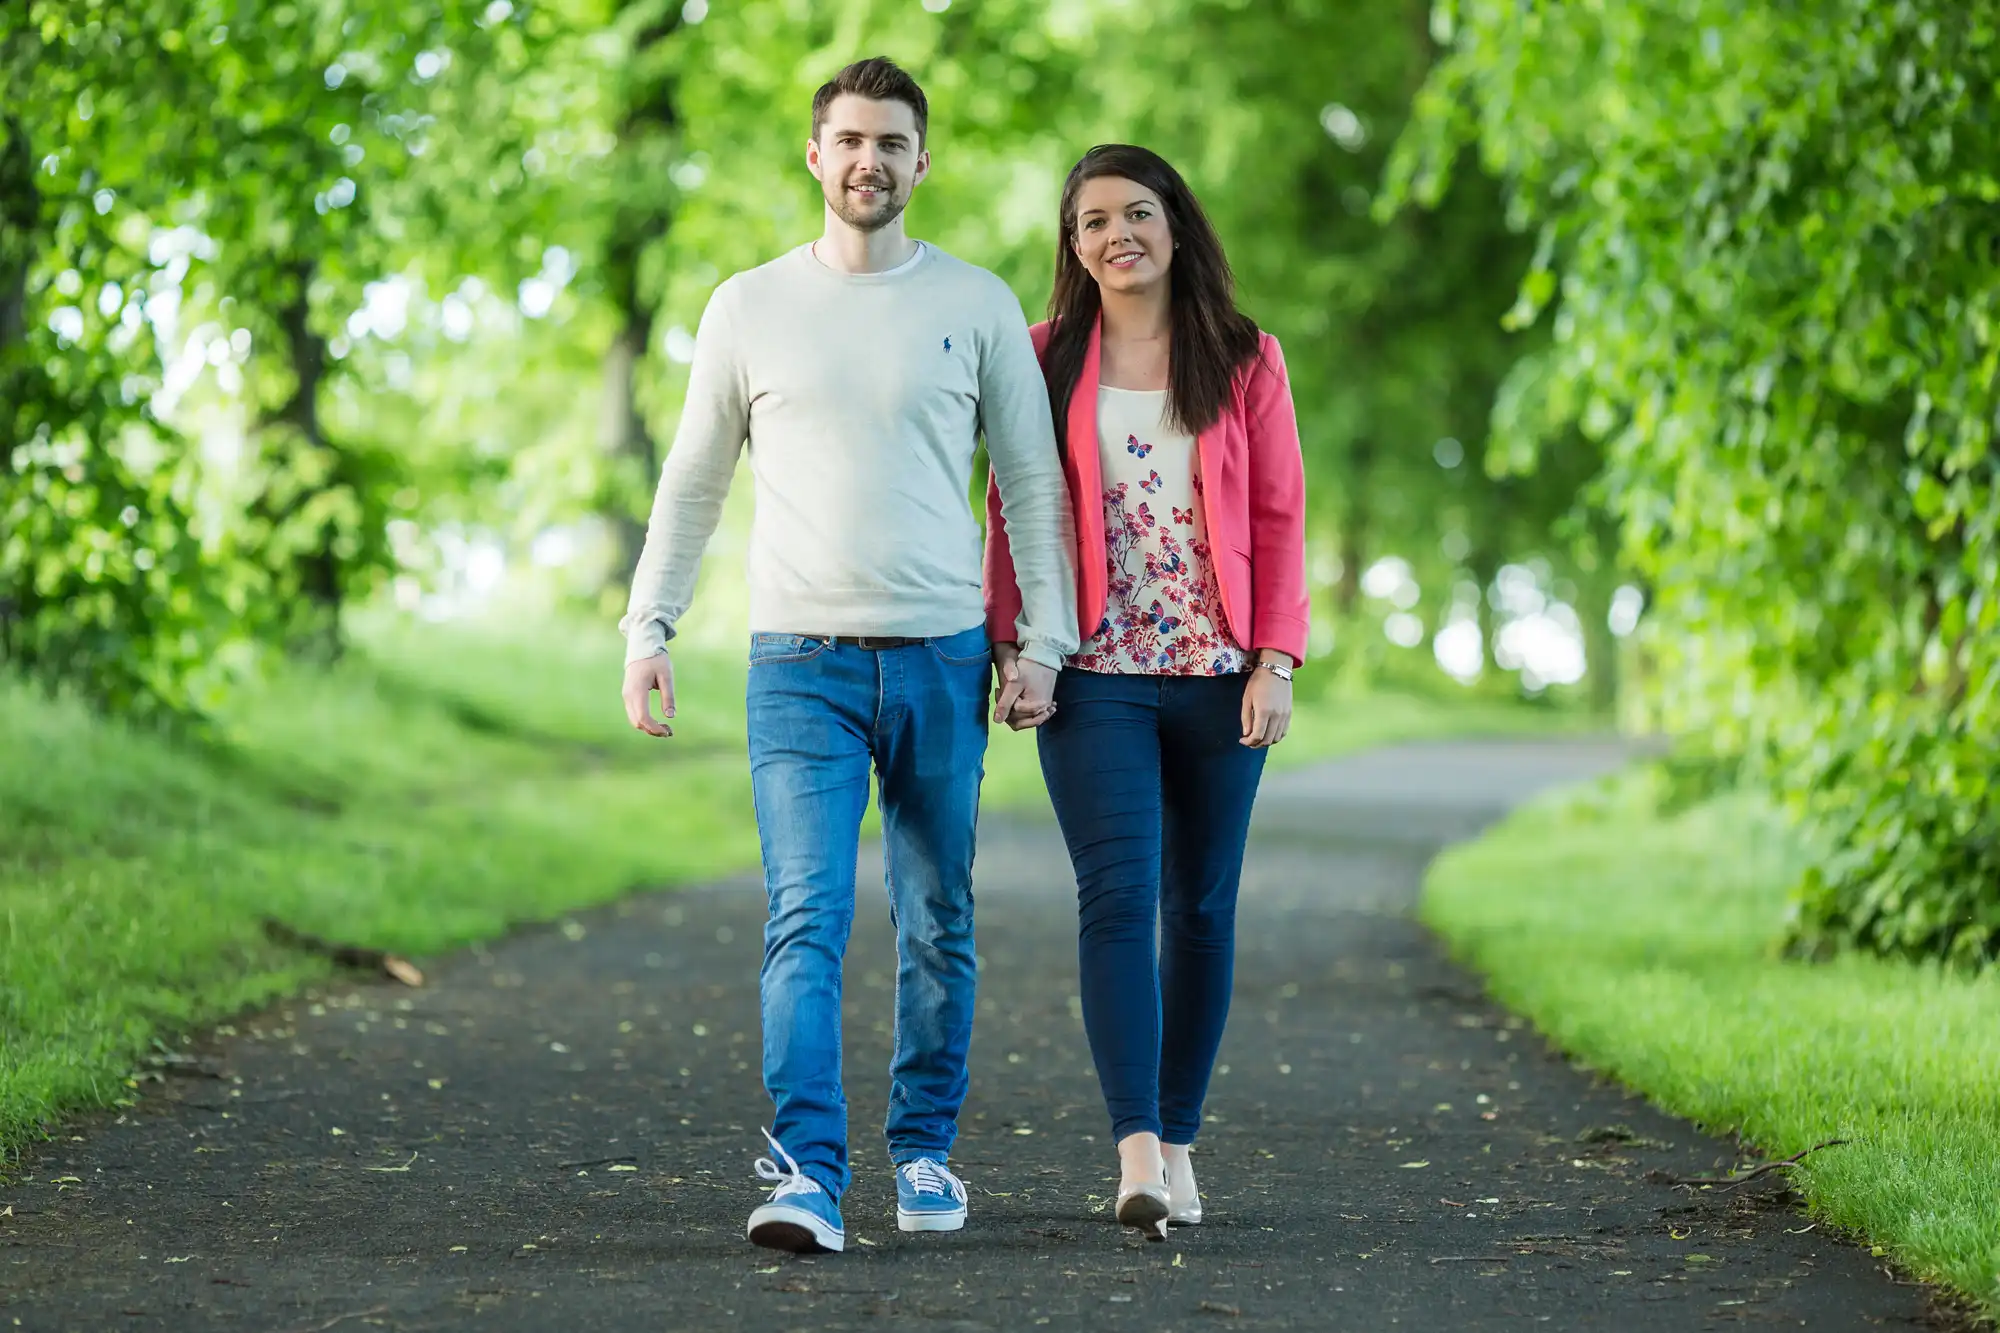 A young man and woman walk hand-in-hand along a tree-lined path, smiling directly at the camera.